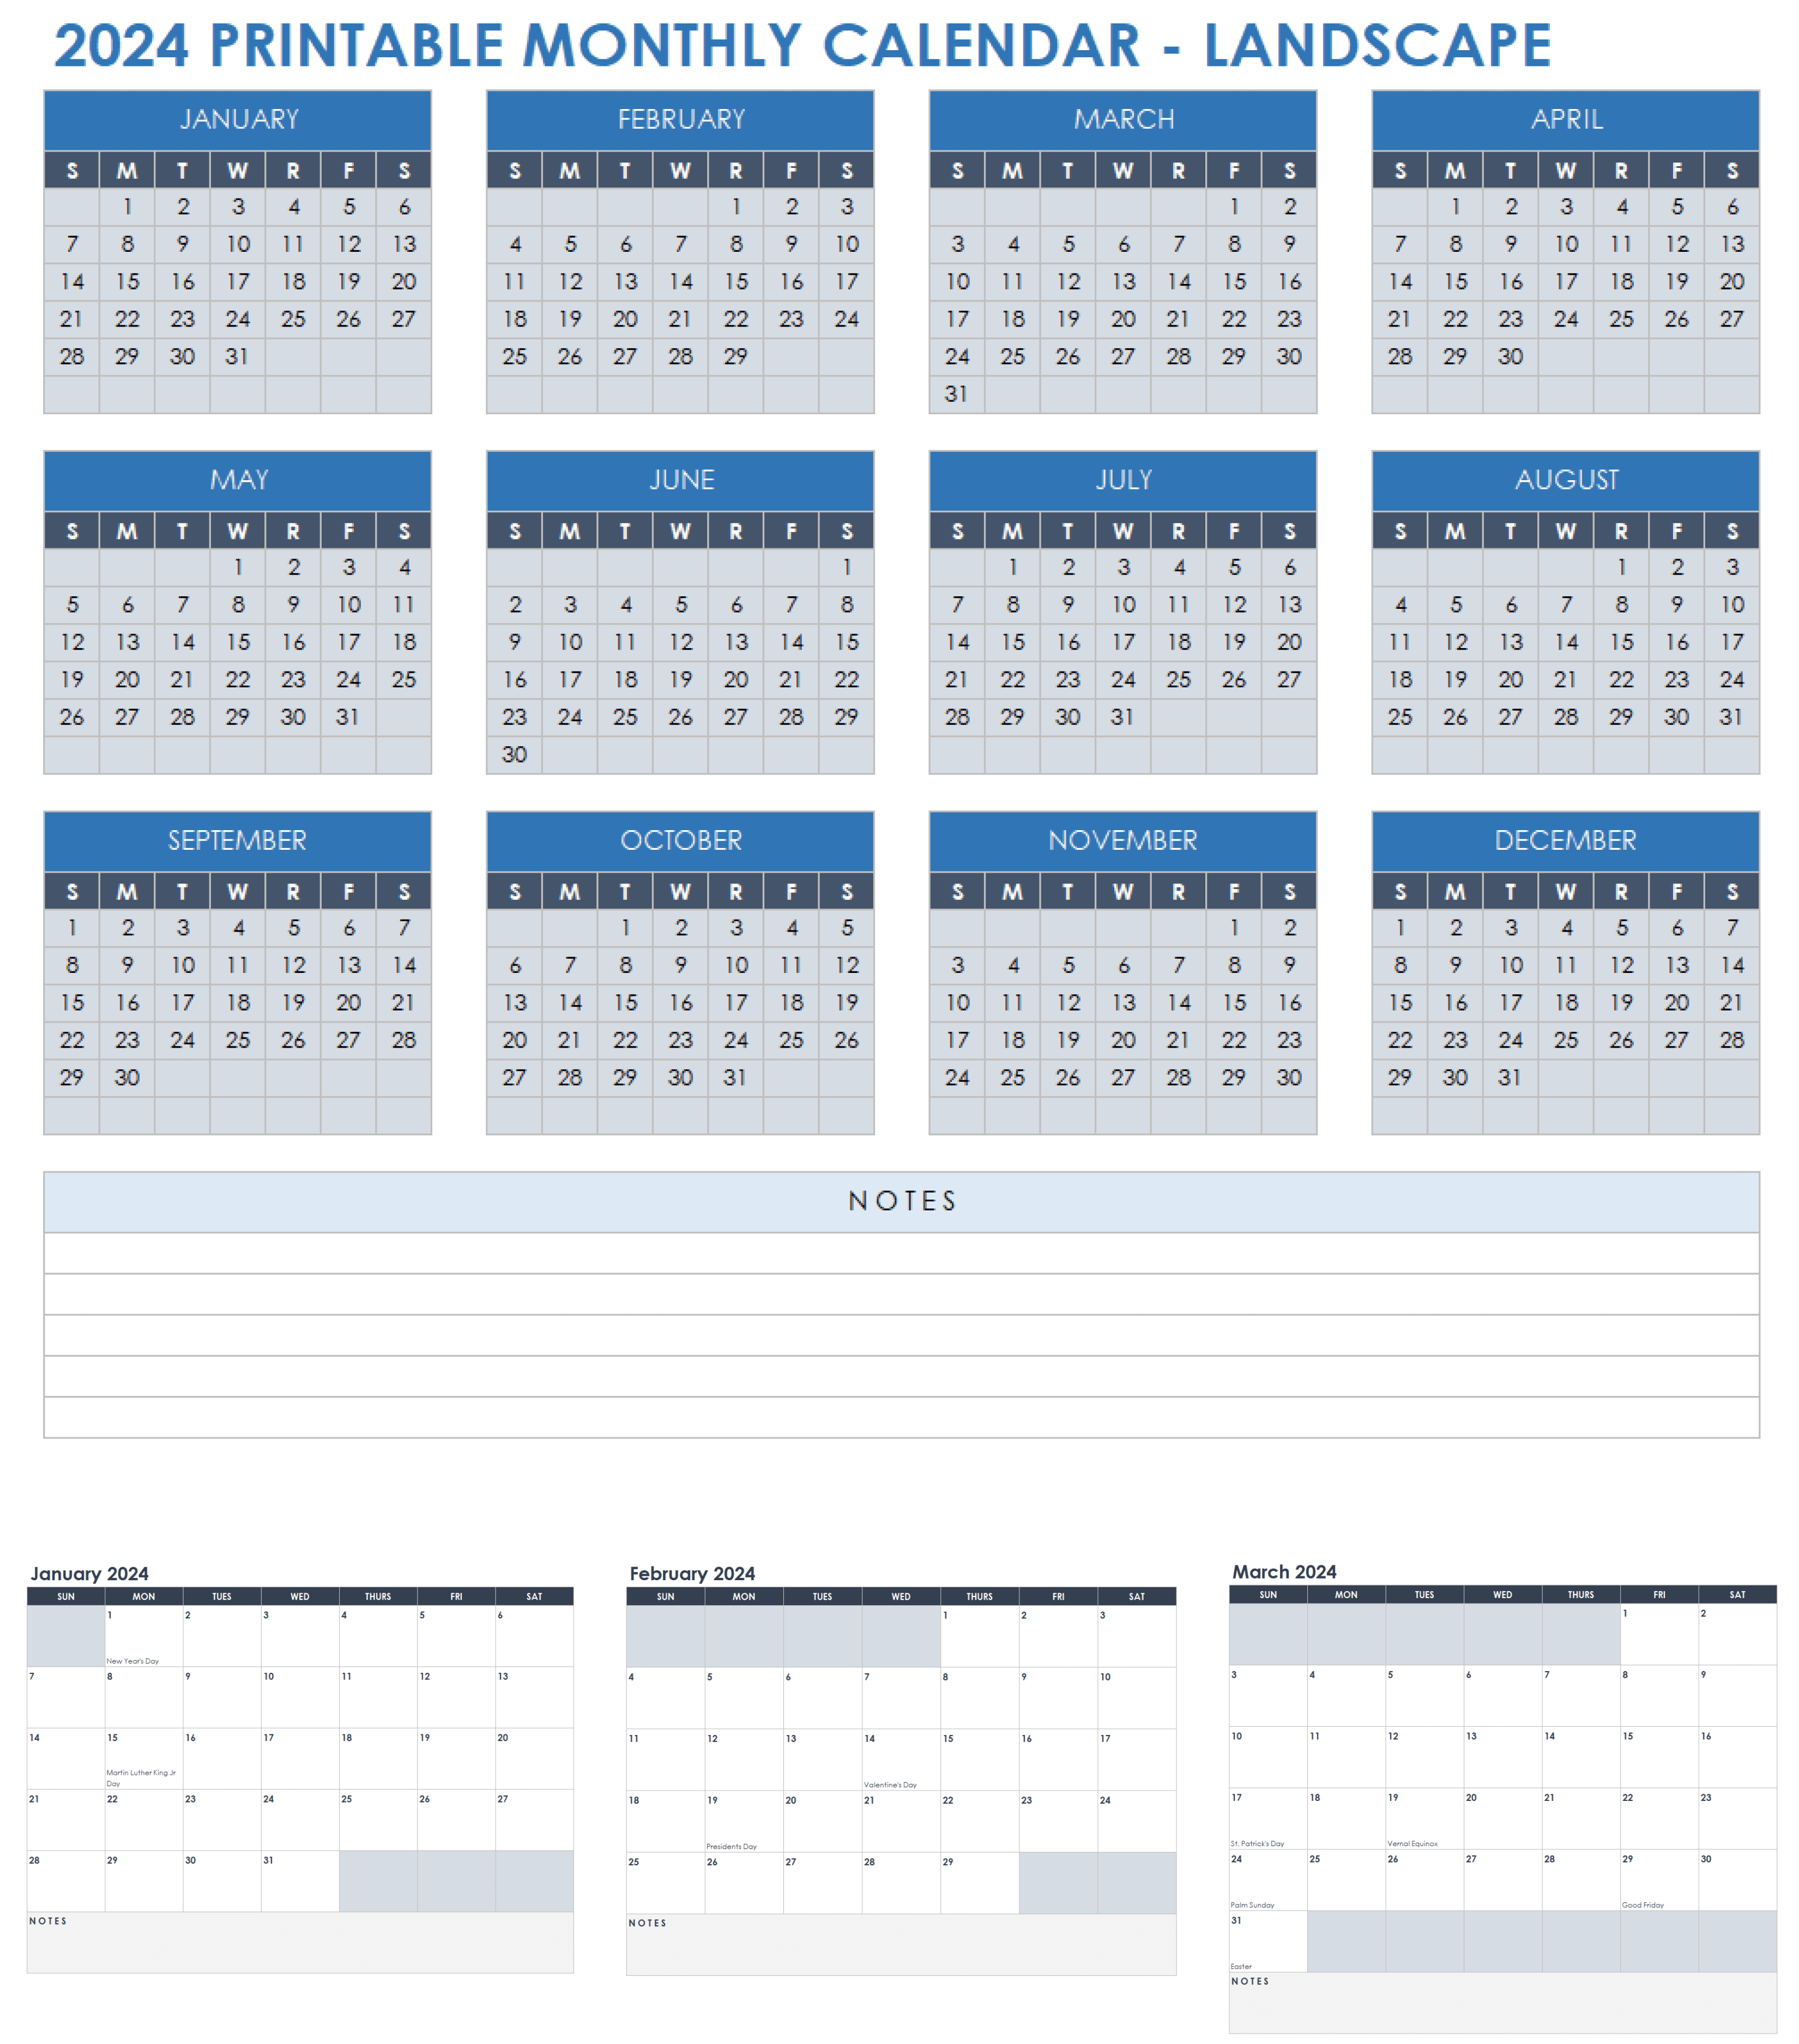 15 Free 2024 Monthly Calendar Templates | Smartsheet pertaining to Free Printable Calendar 2024 That I Can Edit